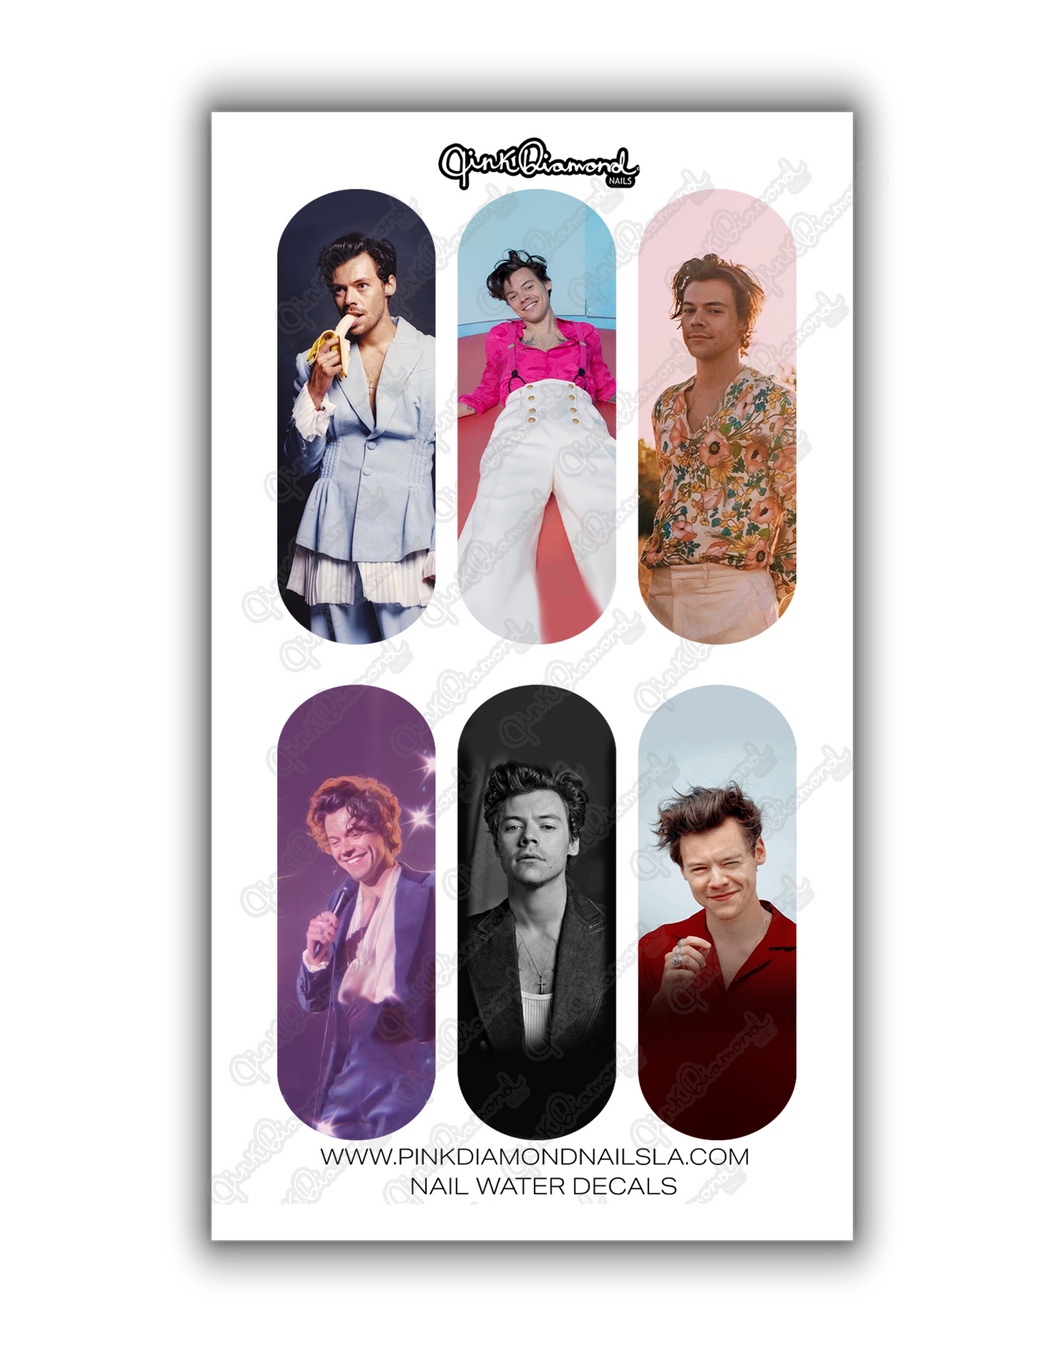 Nail water decals - XL Harry styles